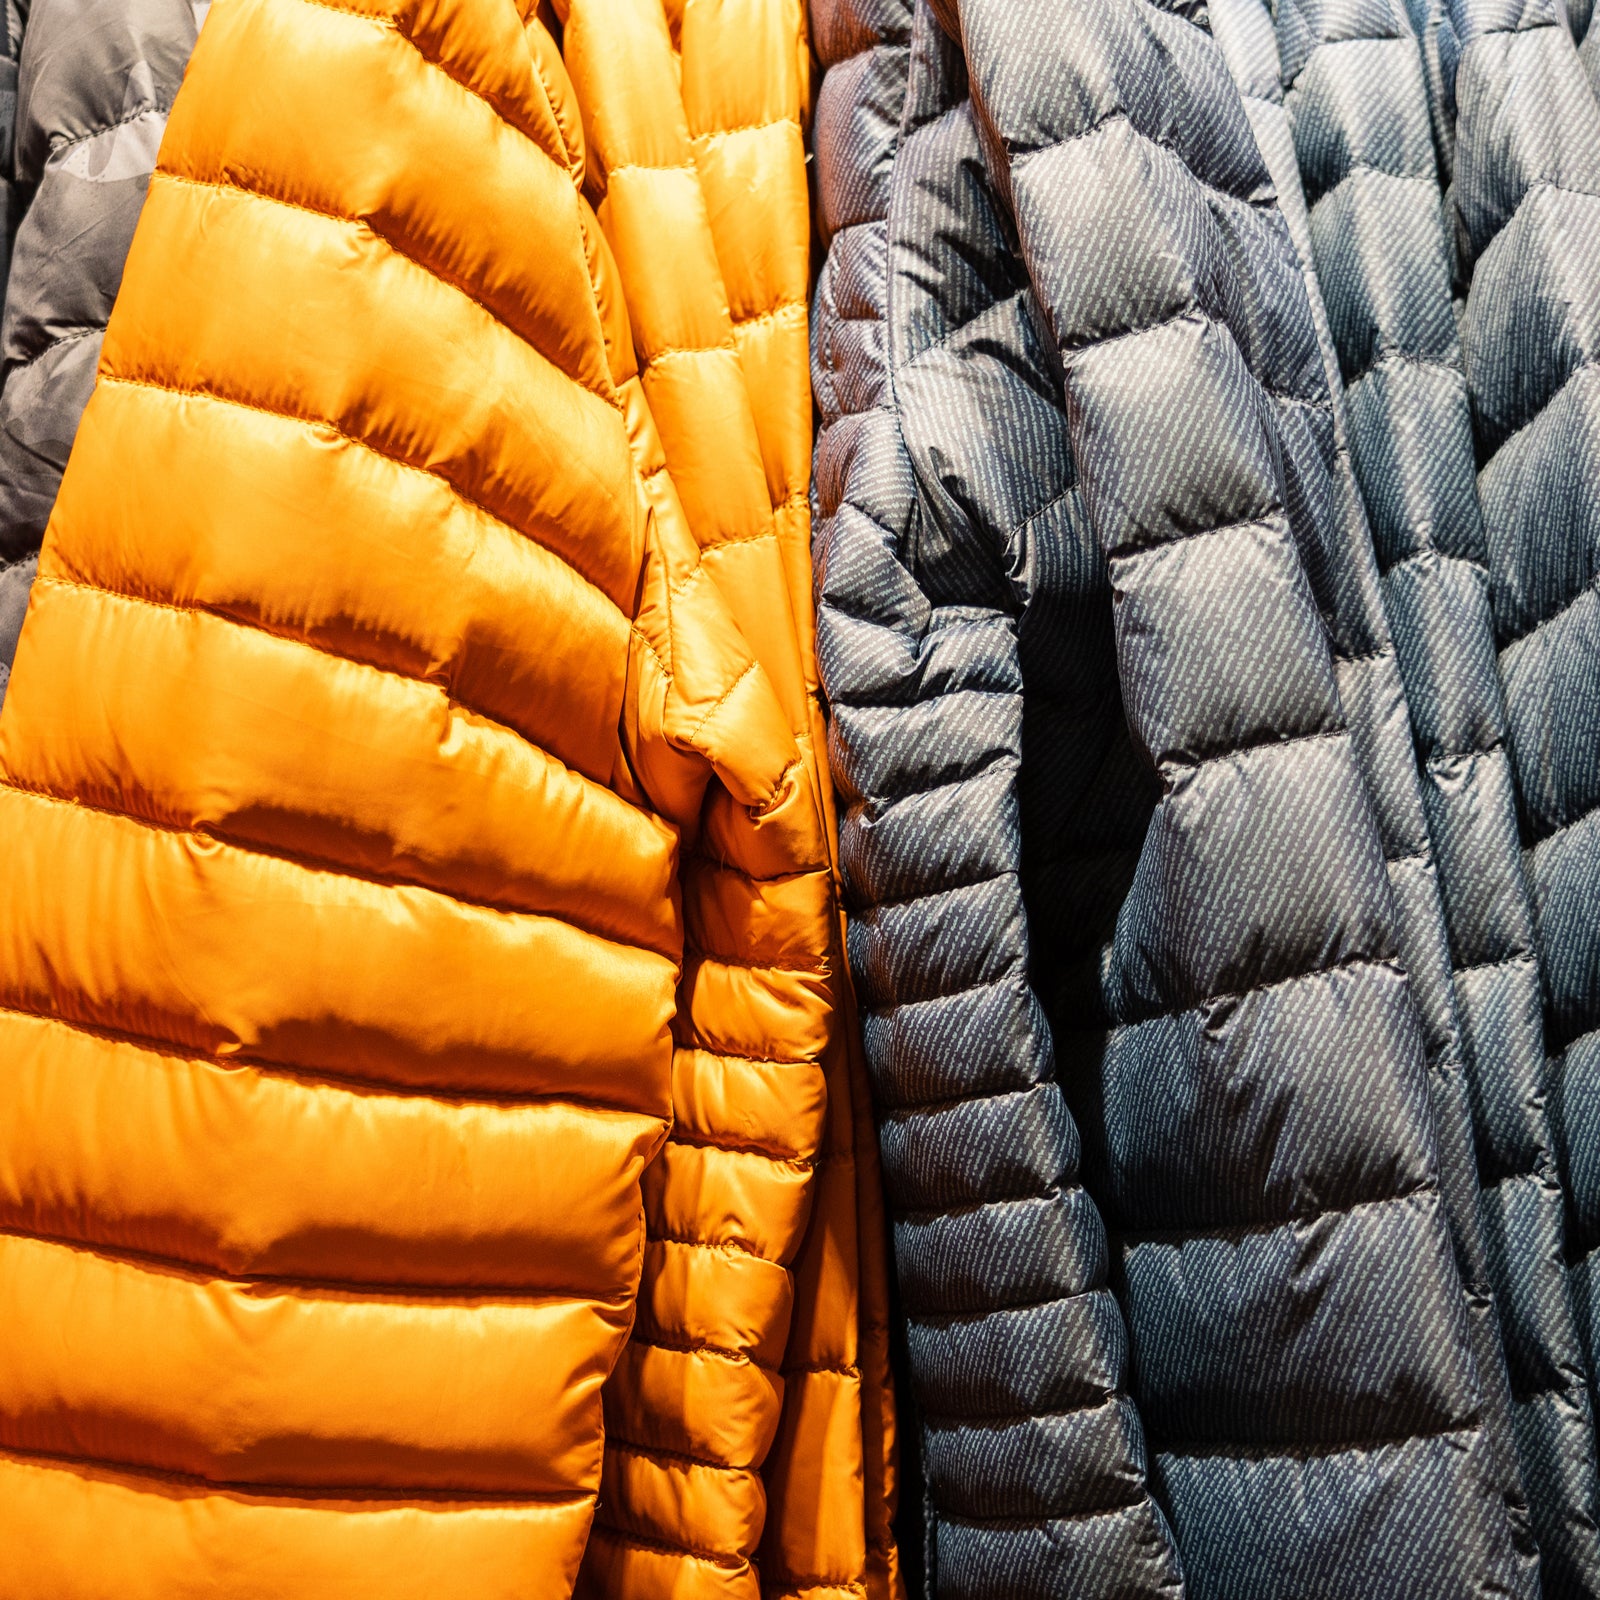 Why We'll See More 1,000-Fill Down Jackets This Fall